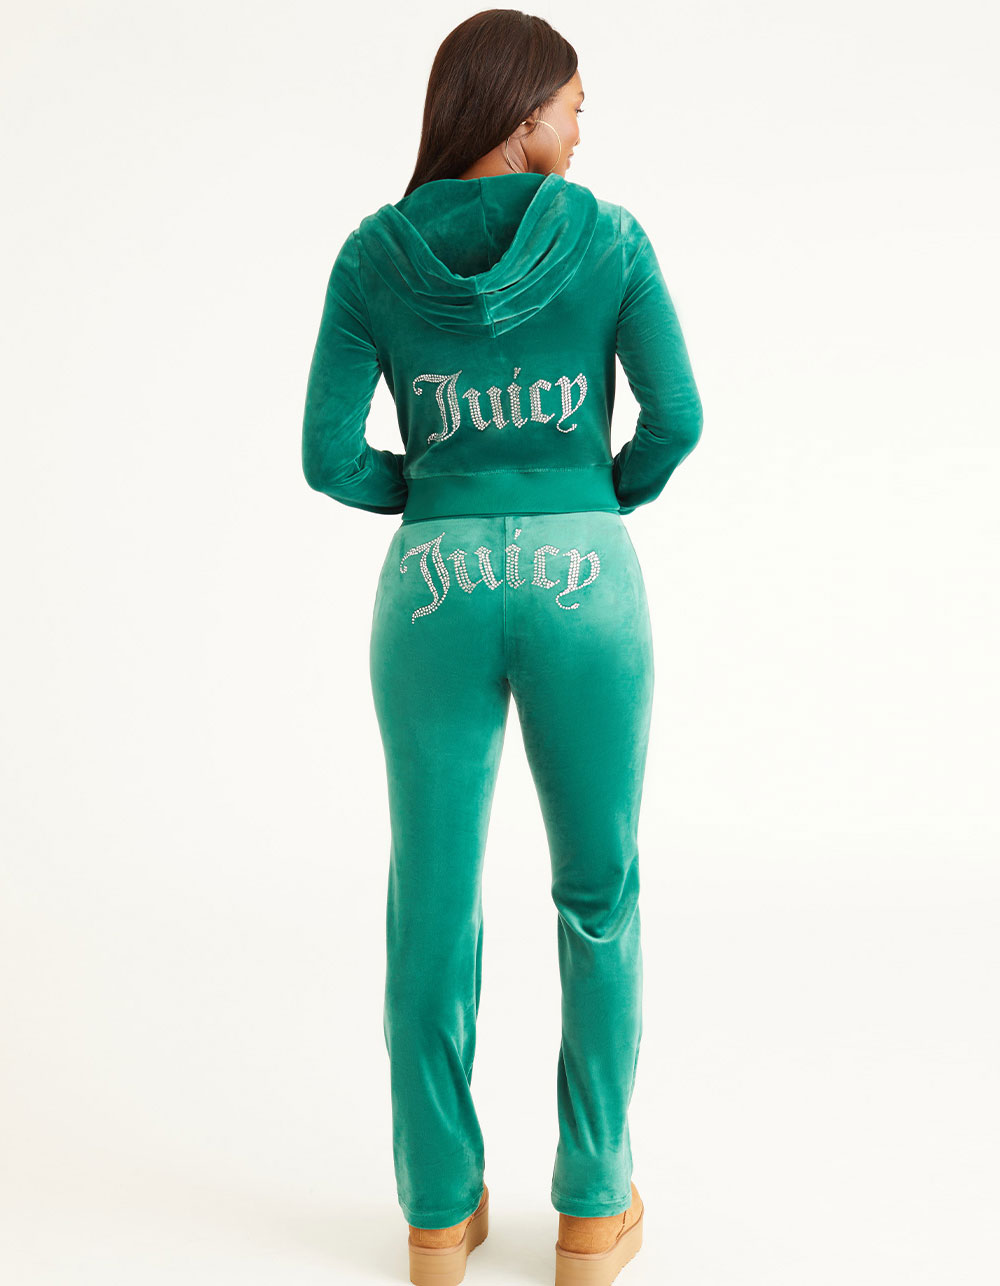 Juicy Couture Dupe: Target Carries a $40 Tracksuit Look-Alike